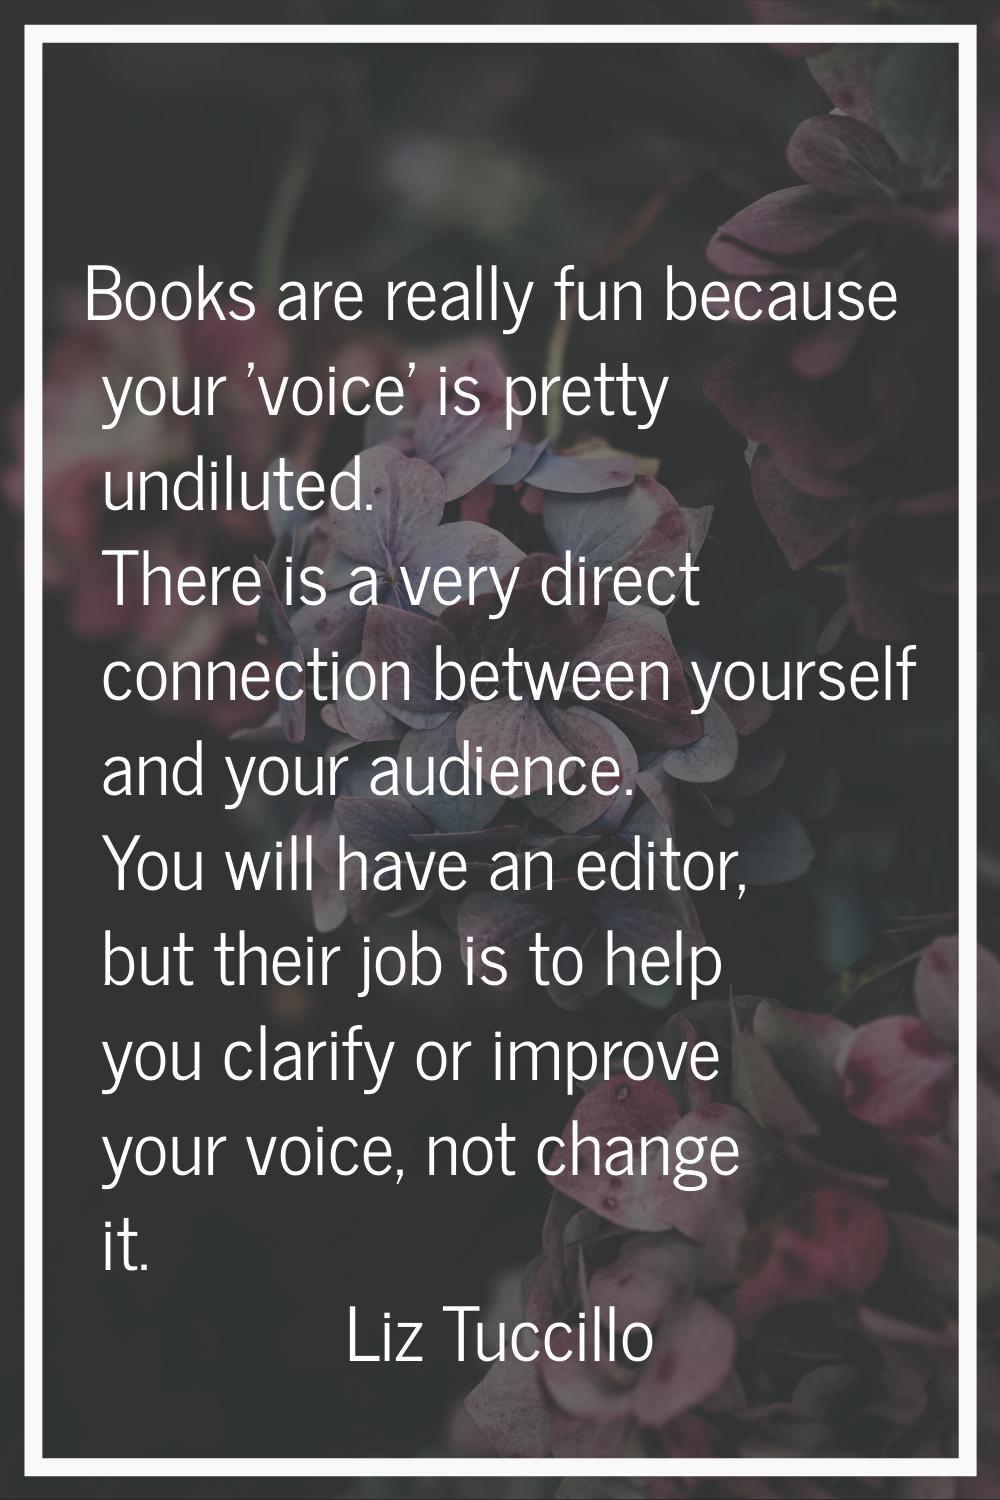 Books are really fun because your 'voice' is pretty undiluted. There is a very direct connection be